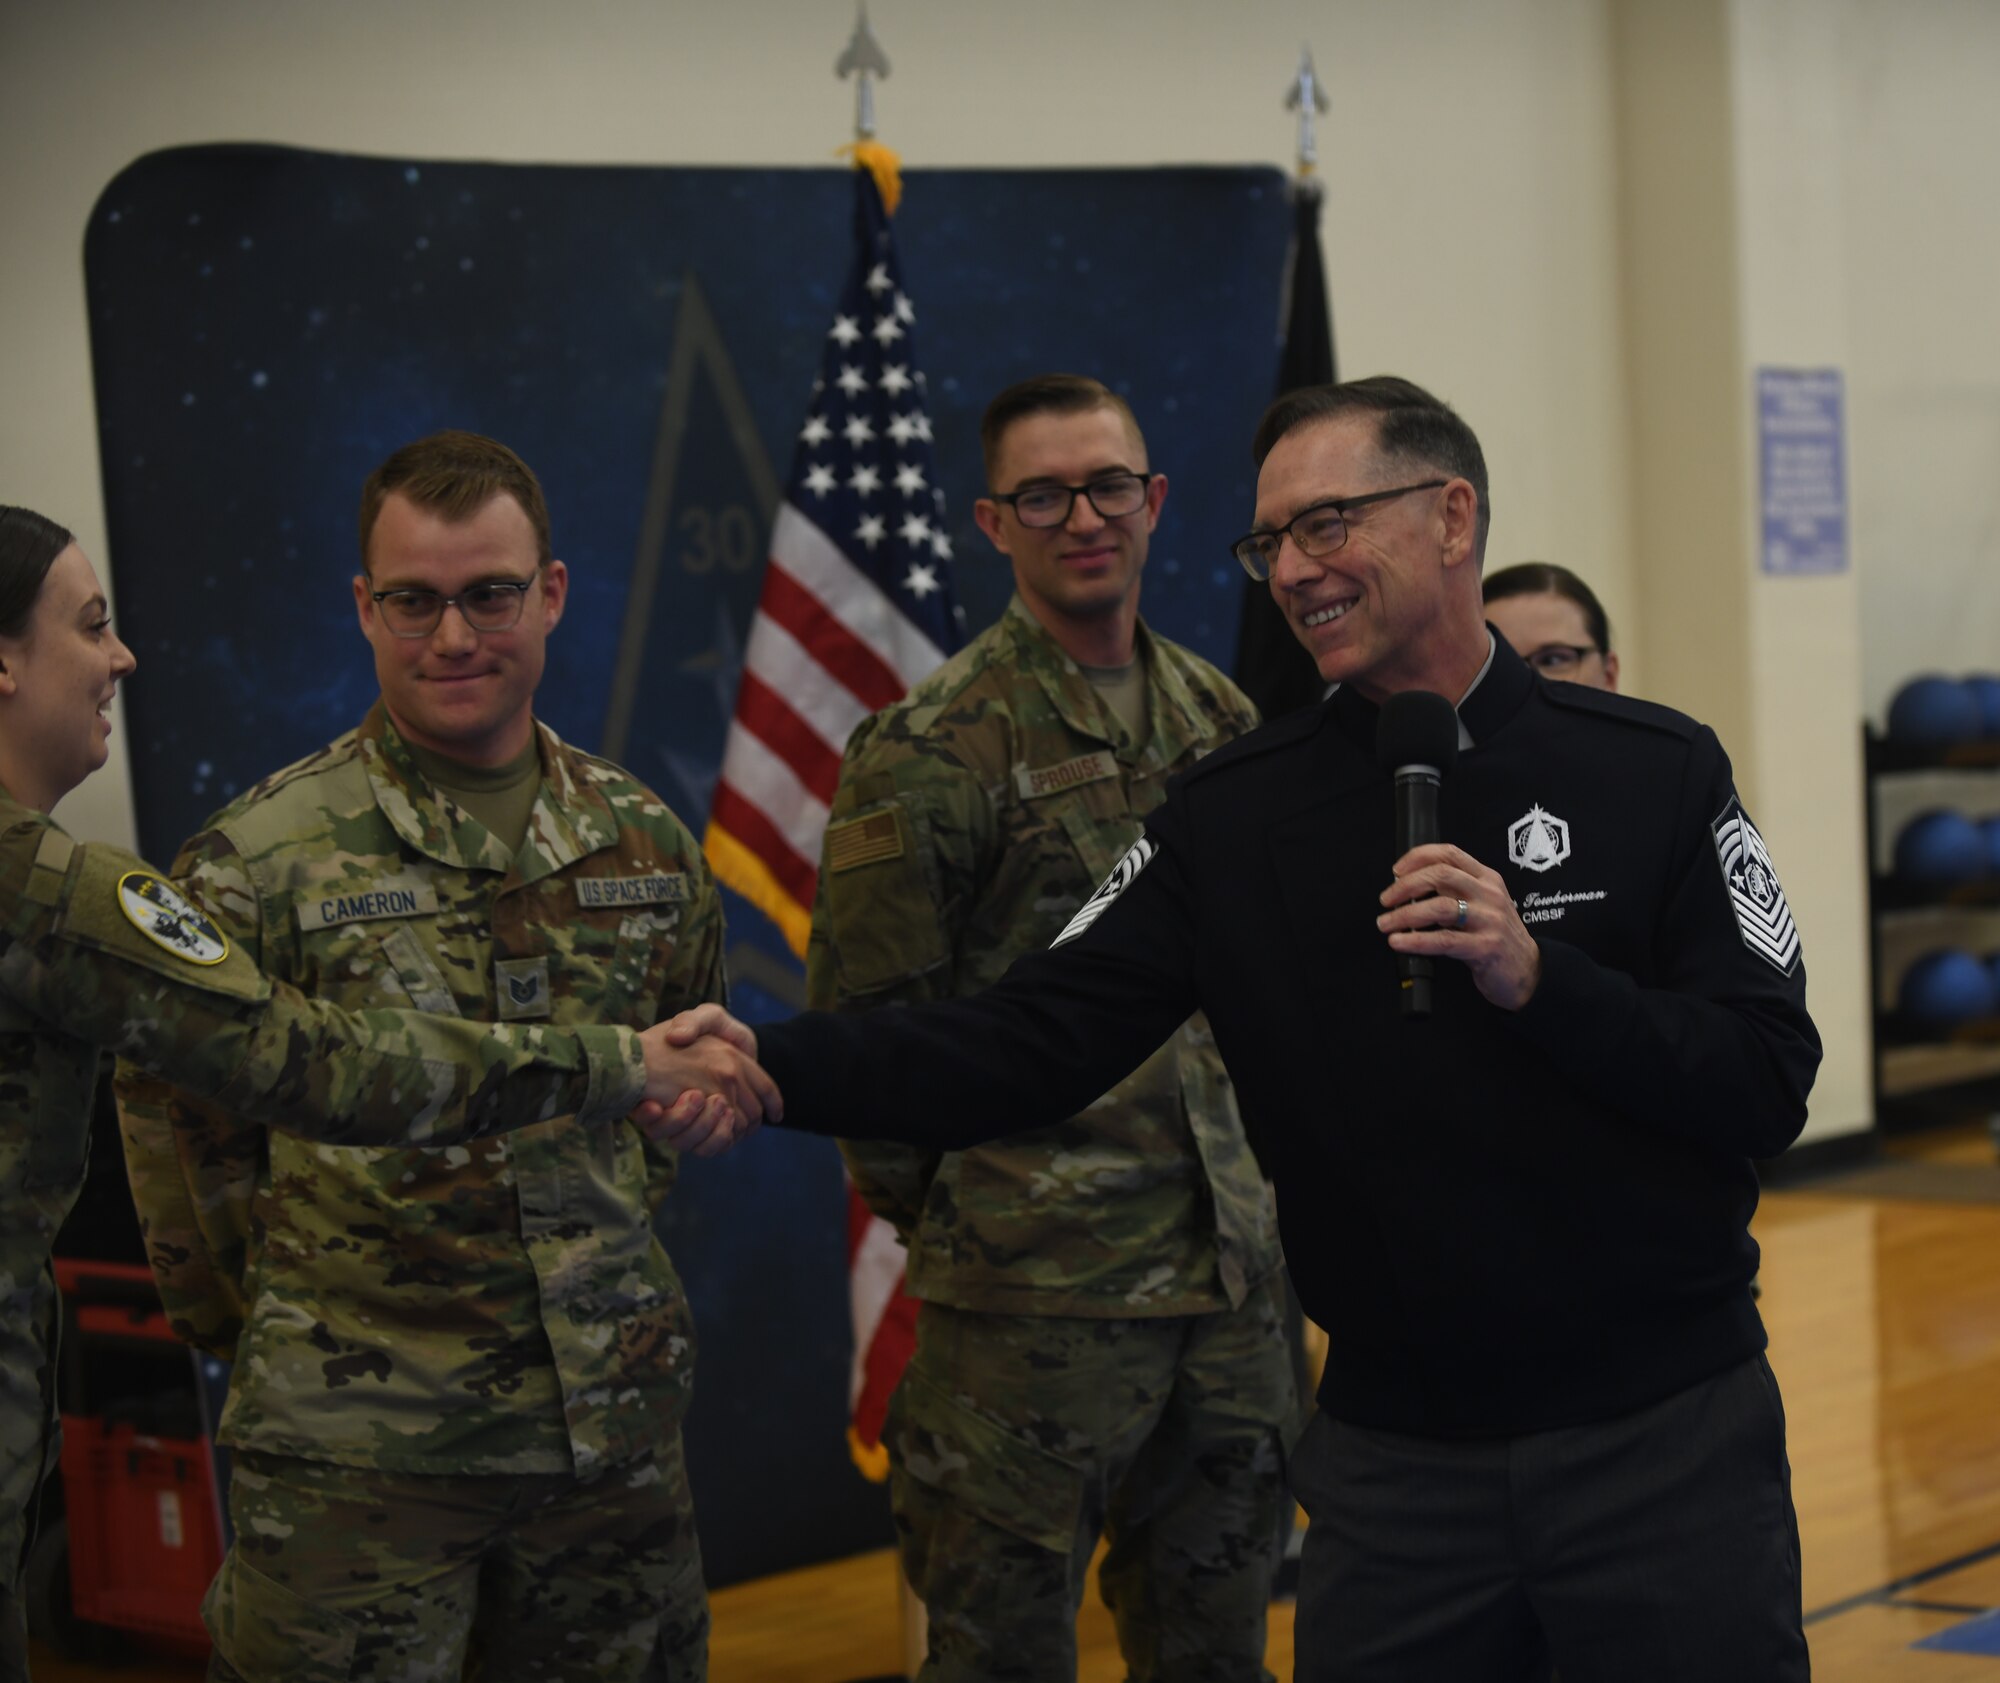 Chief Master Sgt. of the Space Force, Roger A. Towberman, shakes the hand of a fellow Guardian during an all-call held on Vandenberg Space Force Base, Calif., May 20, 2022. CMSSF Towberman awarded his coin to six Airmen and Guardians for going above and beyond their duties on base. (U.S. Space Force photo by Airman 1st Class Ryan Quijas)